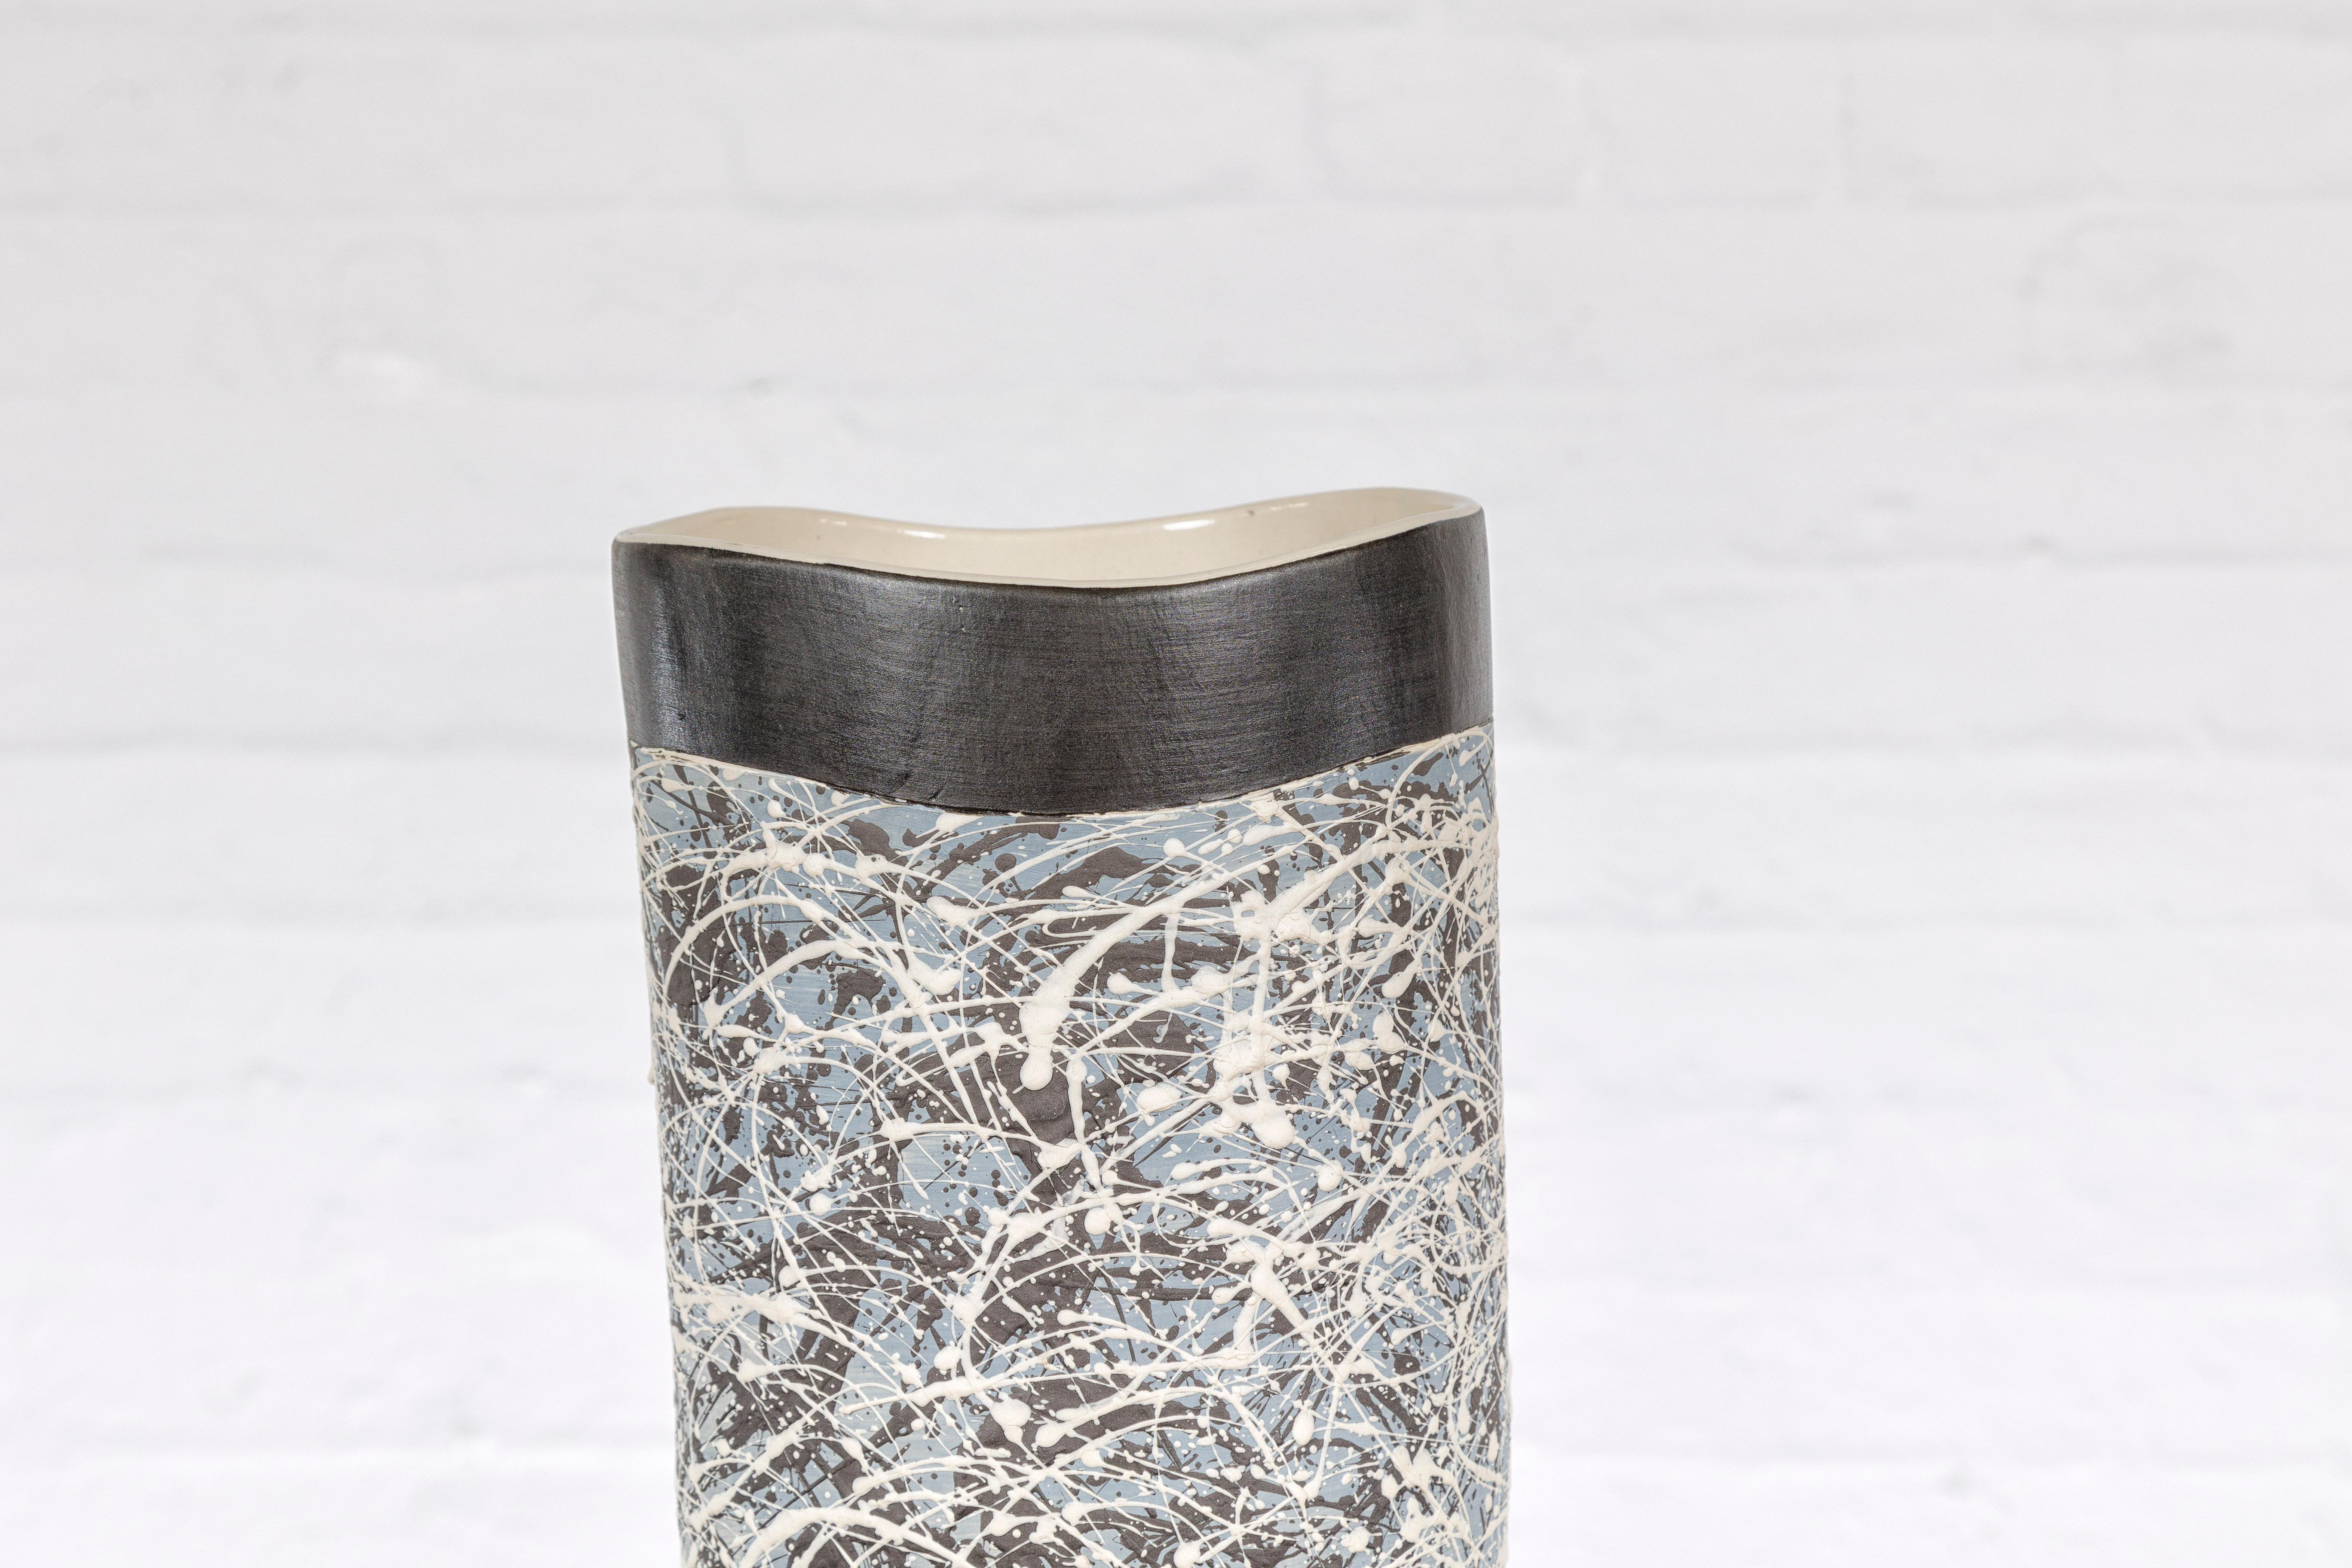 Textured Blue Gray, White, Brown and Black Spattered Ceramic Vase For Sale 2